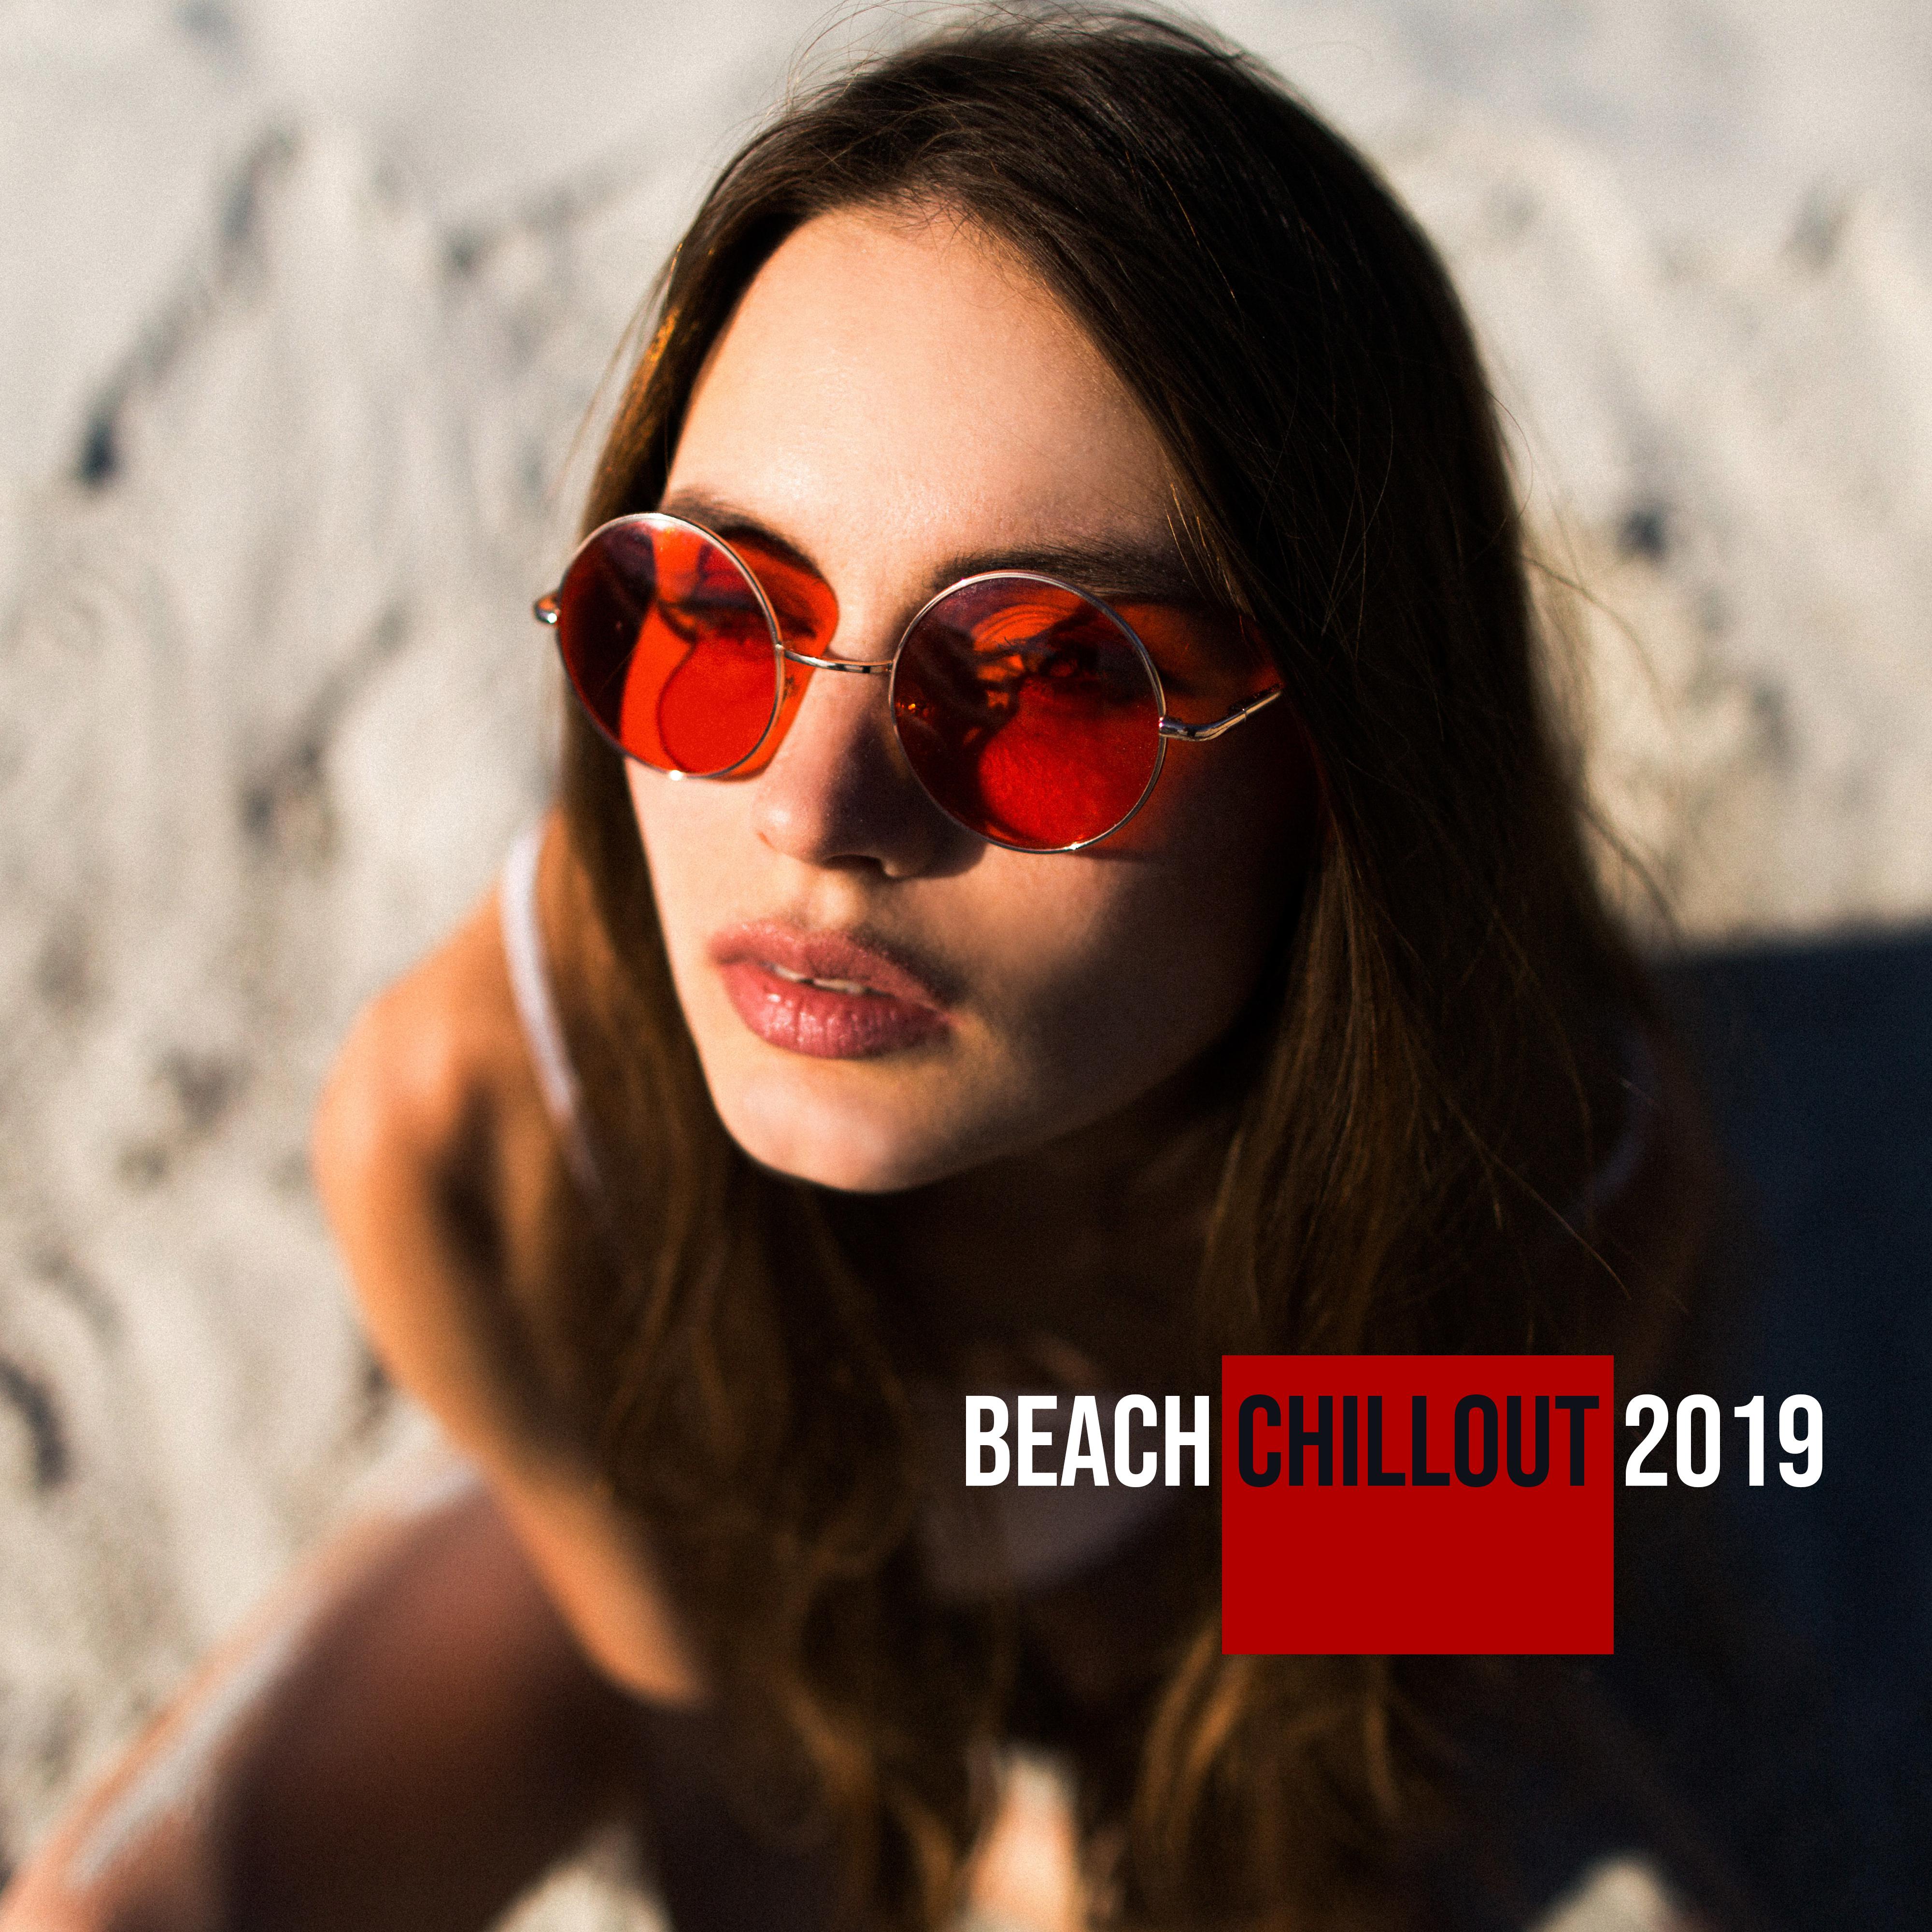 Beach Chillout 2019